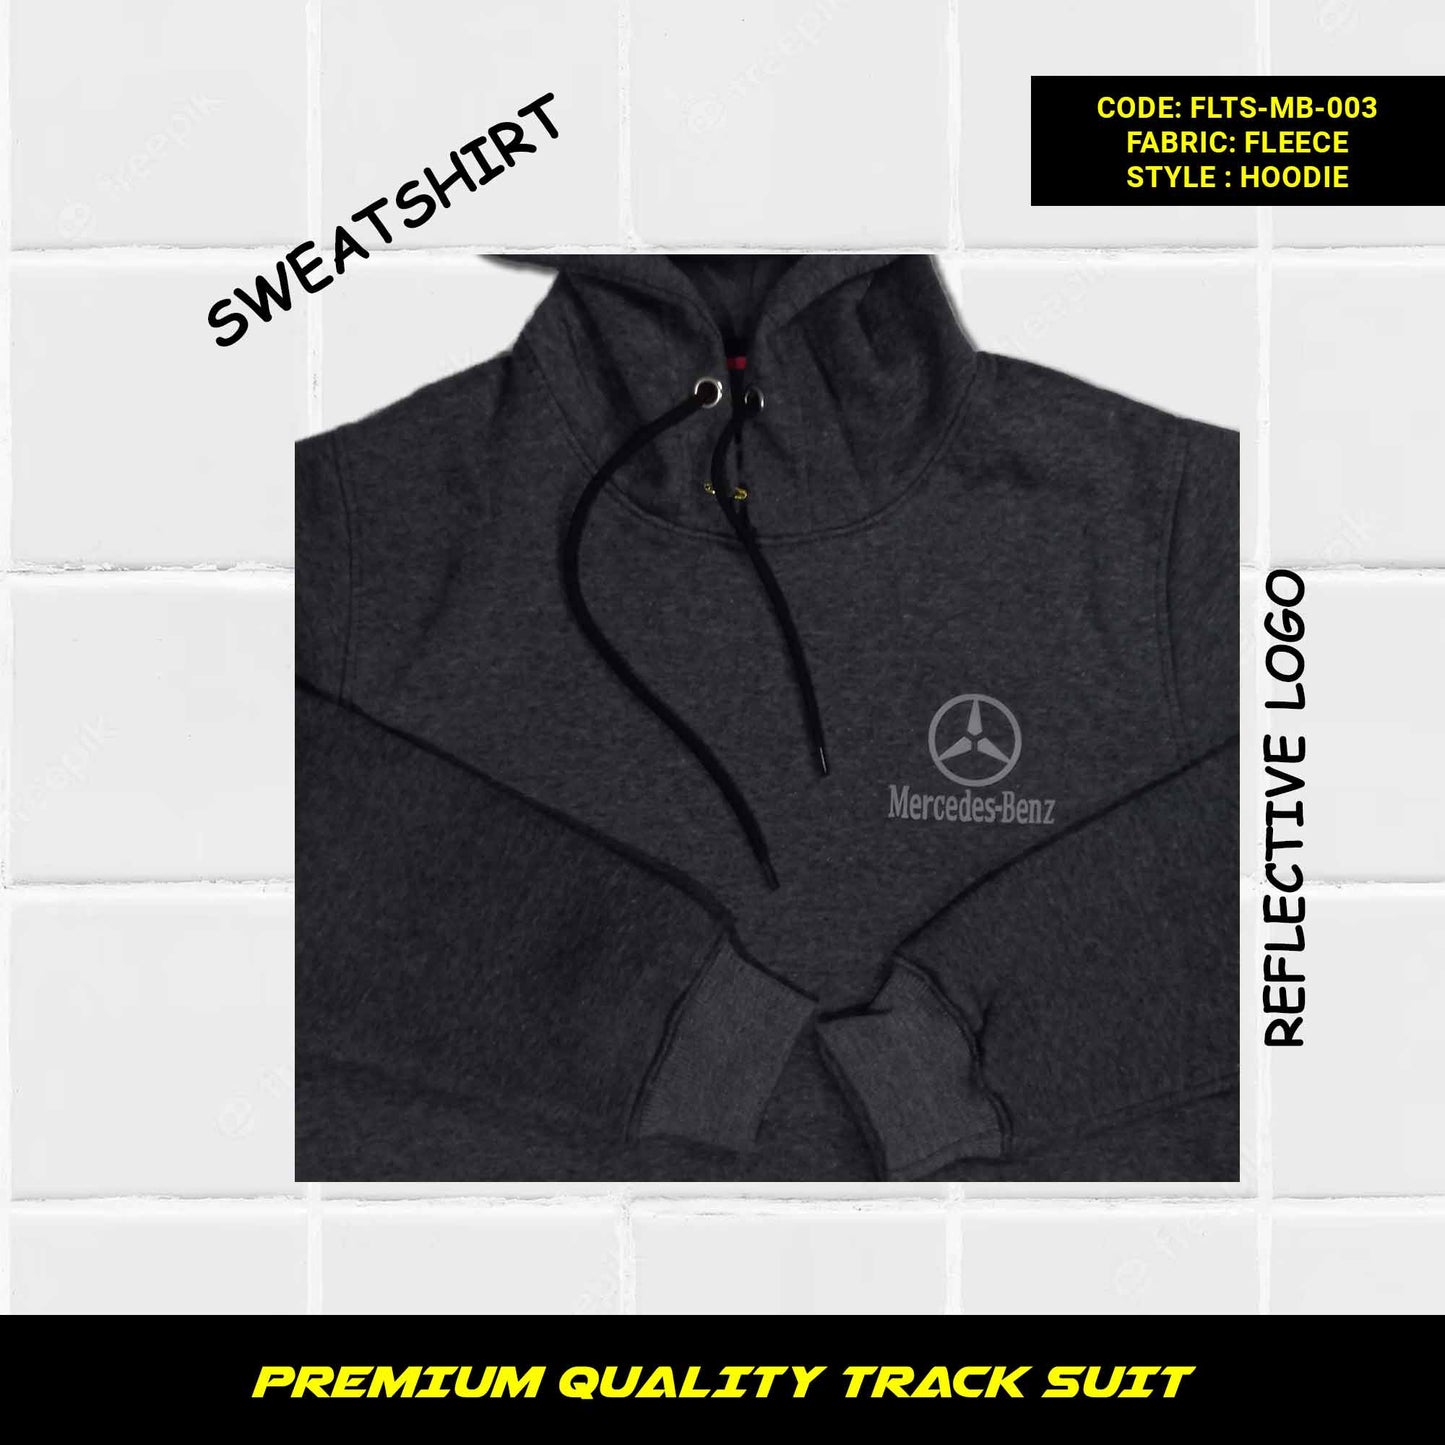 Men's Premium Quality Cotton Fleece Tracksuit for Winter in Pakistan, This men's premium quality cotton fleece tracksuit is perfect for staying warm and comfortable all winter long. It's made from soft and cozy cotton fleece that's 320-325 GSM thick, making it perfect for even the coldest days. The tracksuit features a hoodie with full sleeves and kangaroo pockets, as well as loose-fitting trousers with zippered pockets and a tape to fasten at the waist.